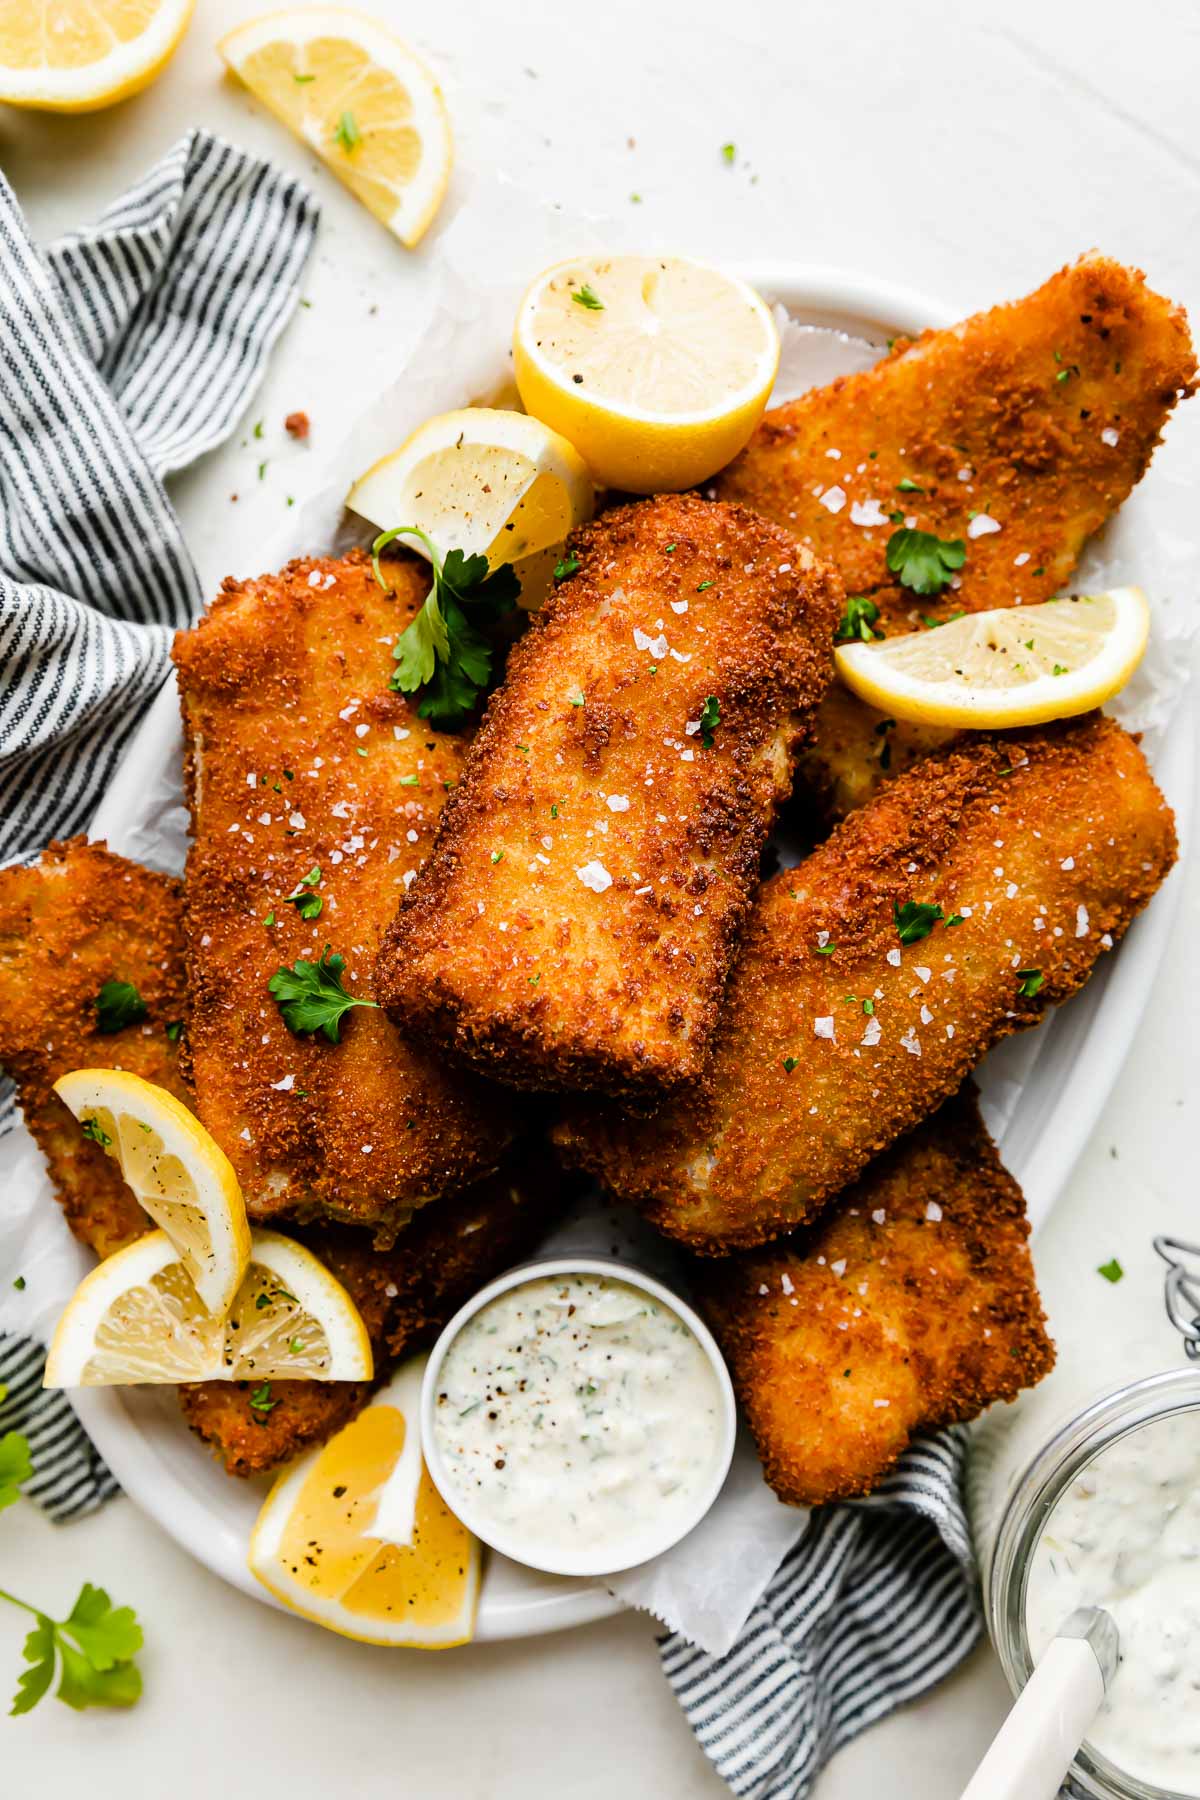 Fish fry pieces are arranged atop a white oval serving platter that sits a top a creamy white textured surface. The fish has been garnished with fresh parsley and flaky sea salt and is served alongside lemon wedges and a small bowl of tartar sauce. The platter is surrounded by a blue and white striped linen napkin, a small glass mason jar filled with tartar sauce with a spoon inside, fresh parsley leaves, and spent lemon wedges.